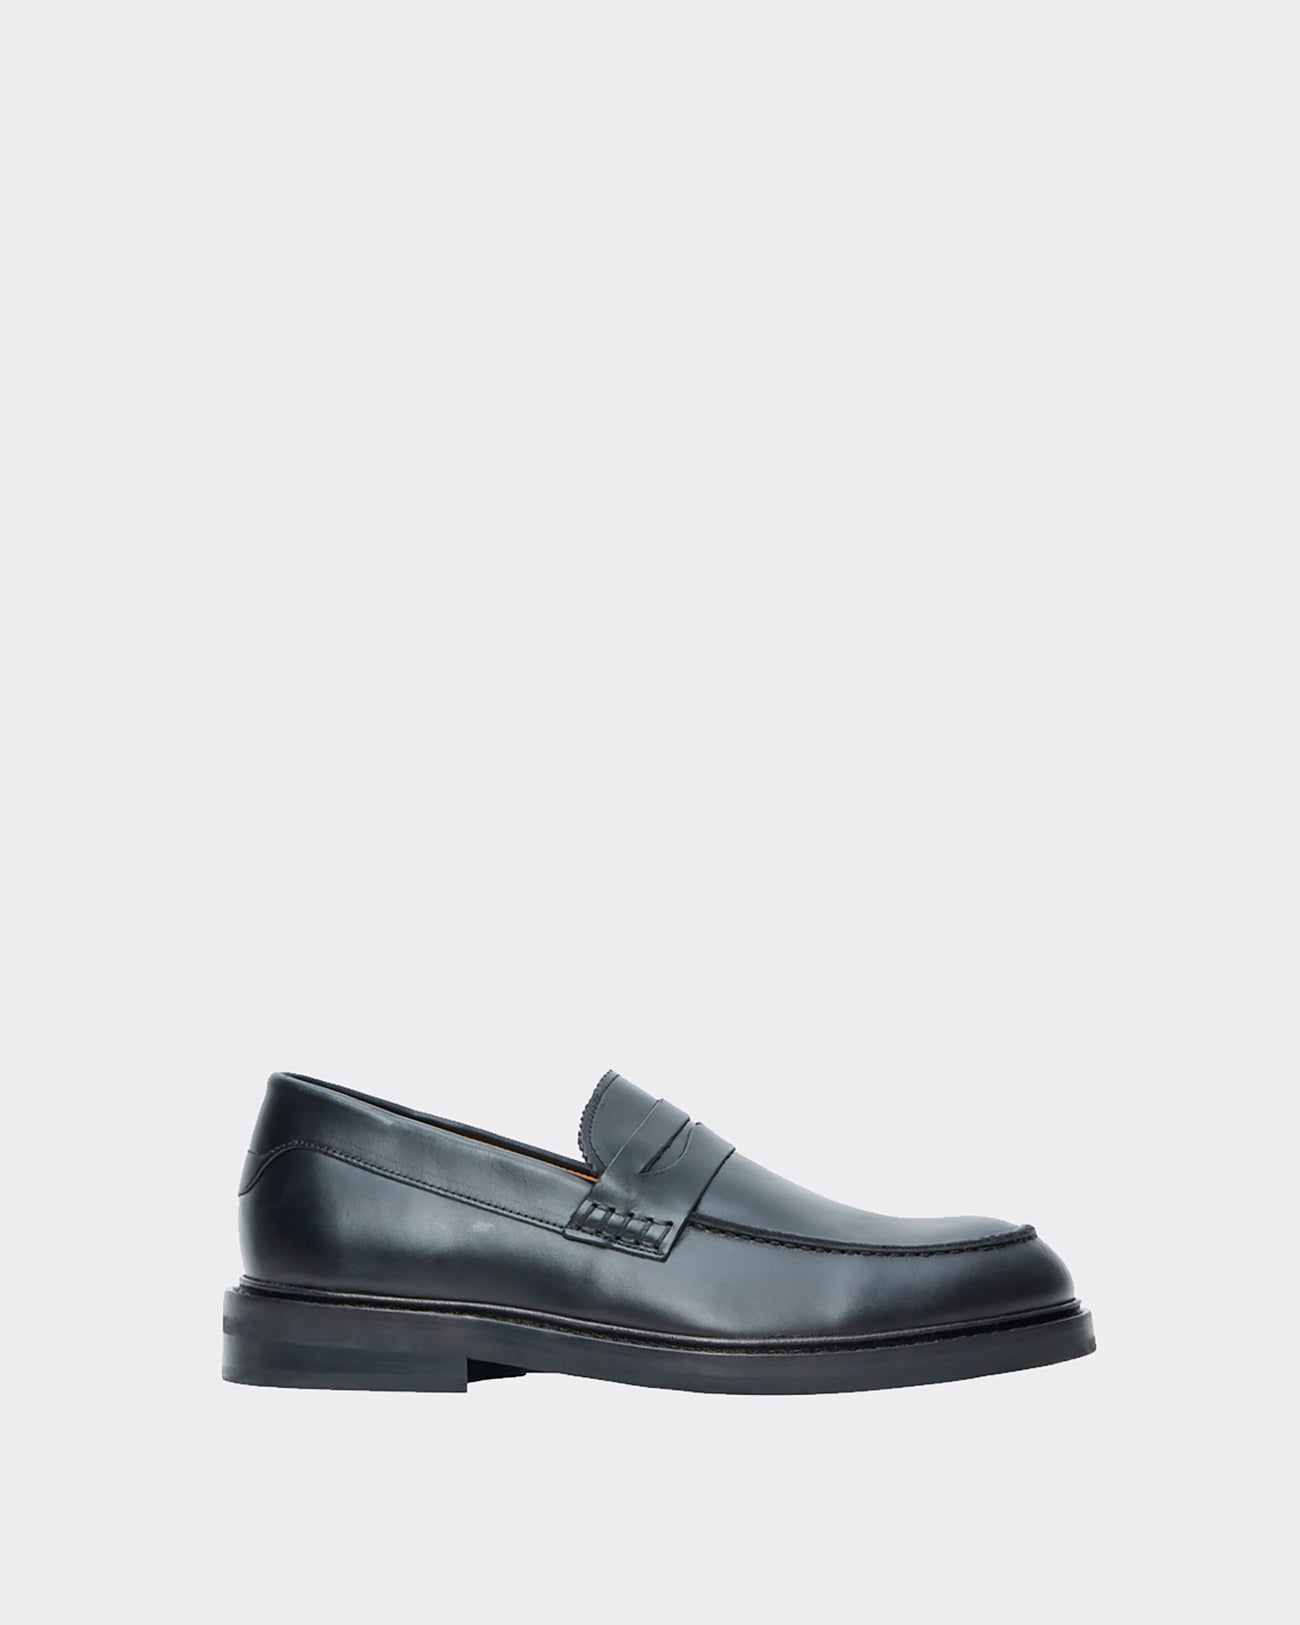 Image of Selected Homme Mocassino Carter Nero in Pelle